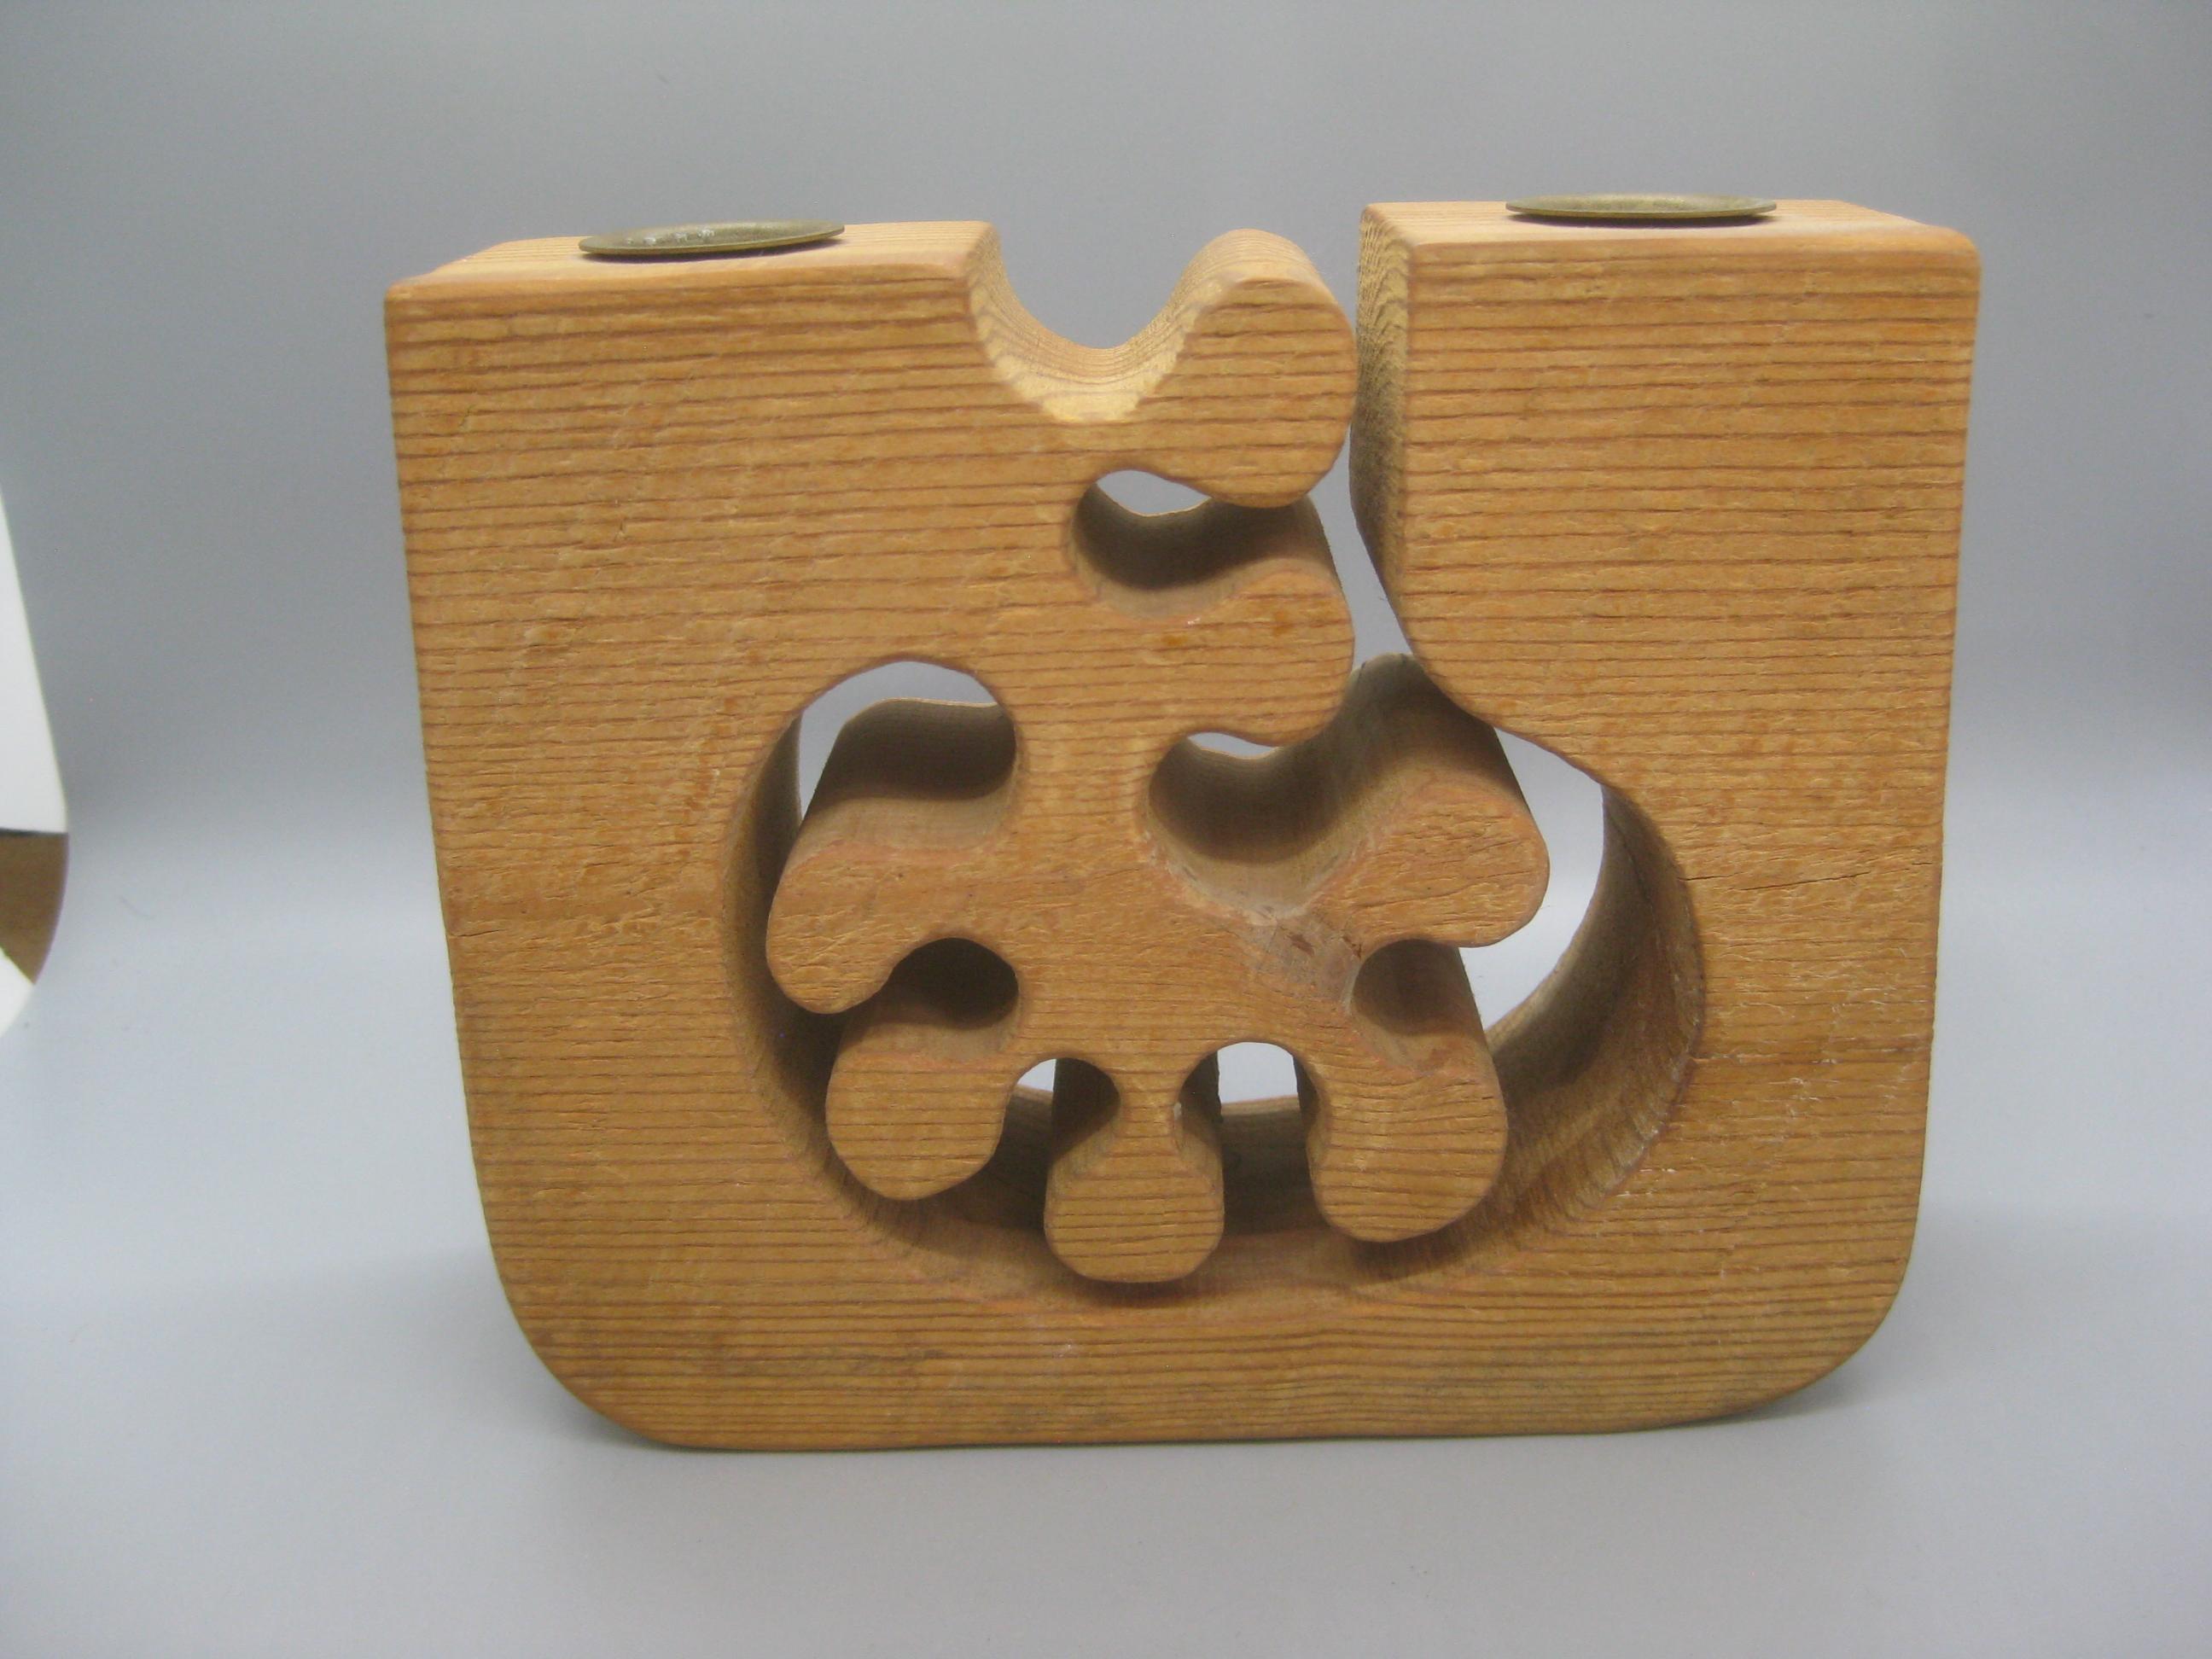 Late 20th Century 1979 Gunnar Kanevad Design Hand Carved Organic Wood Candle Holder Carving Sweden For Sale